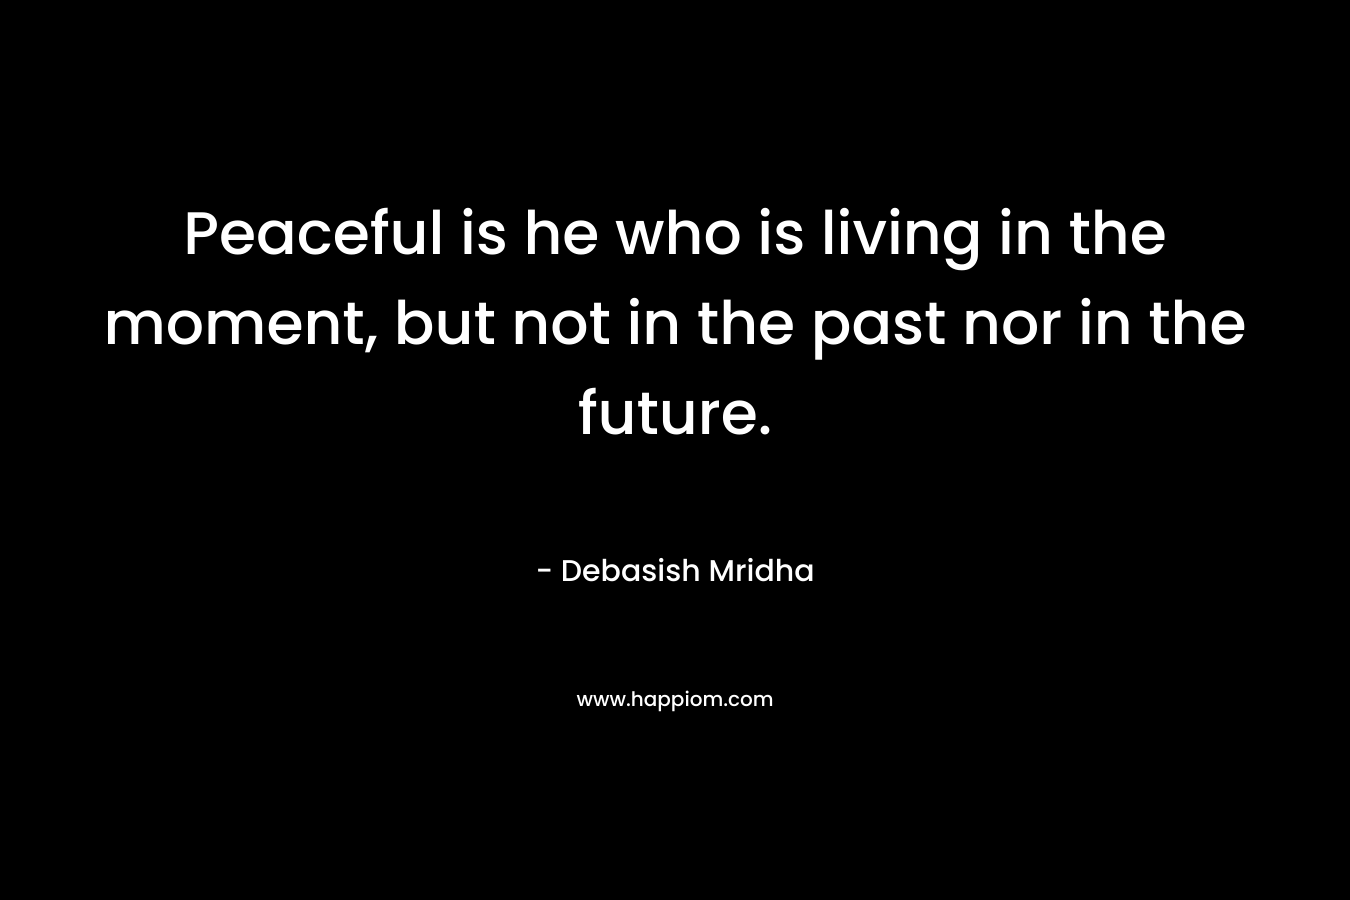 Peaceful is he who is living in the moment, but not in the past nor in the future.